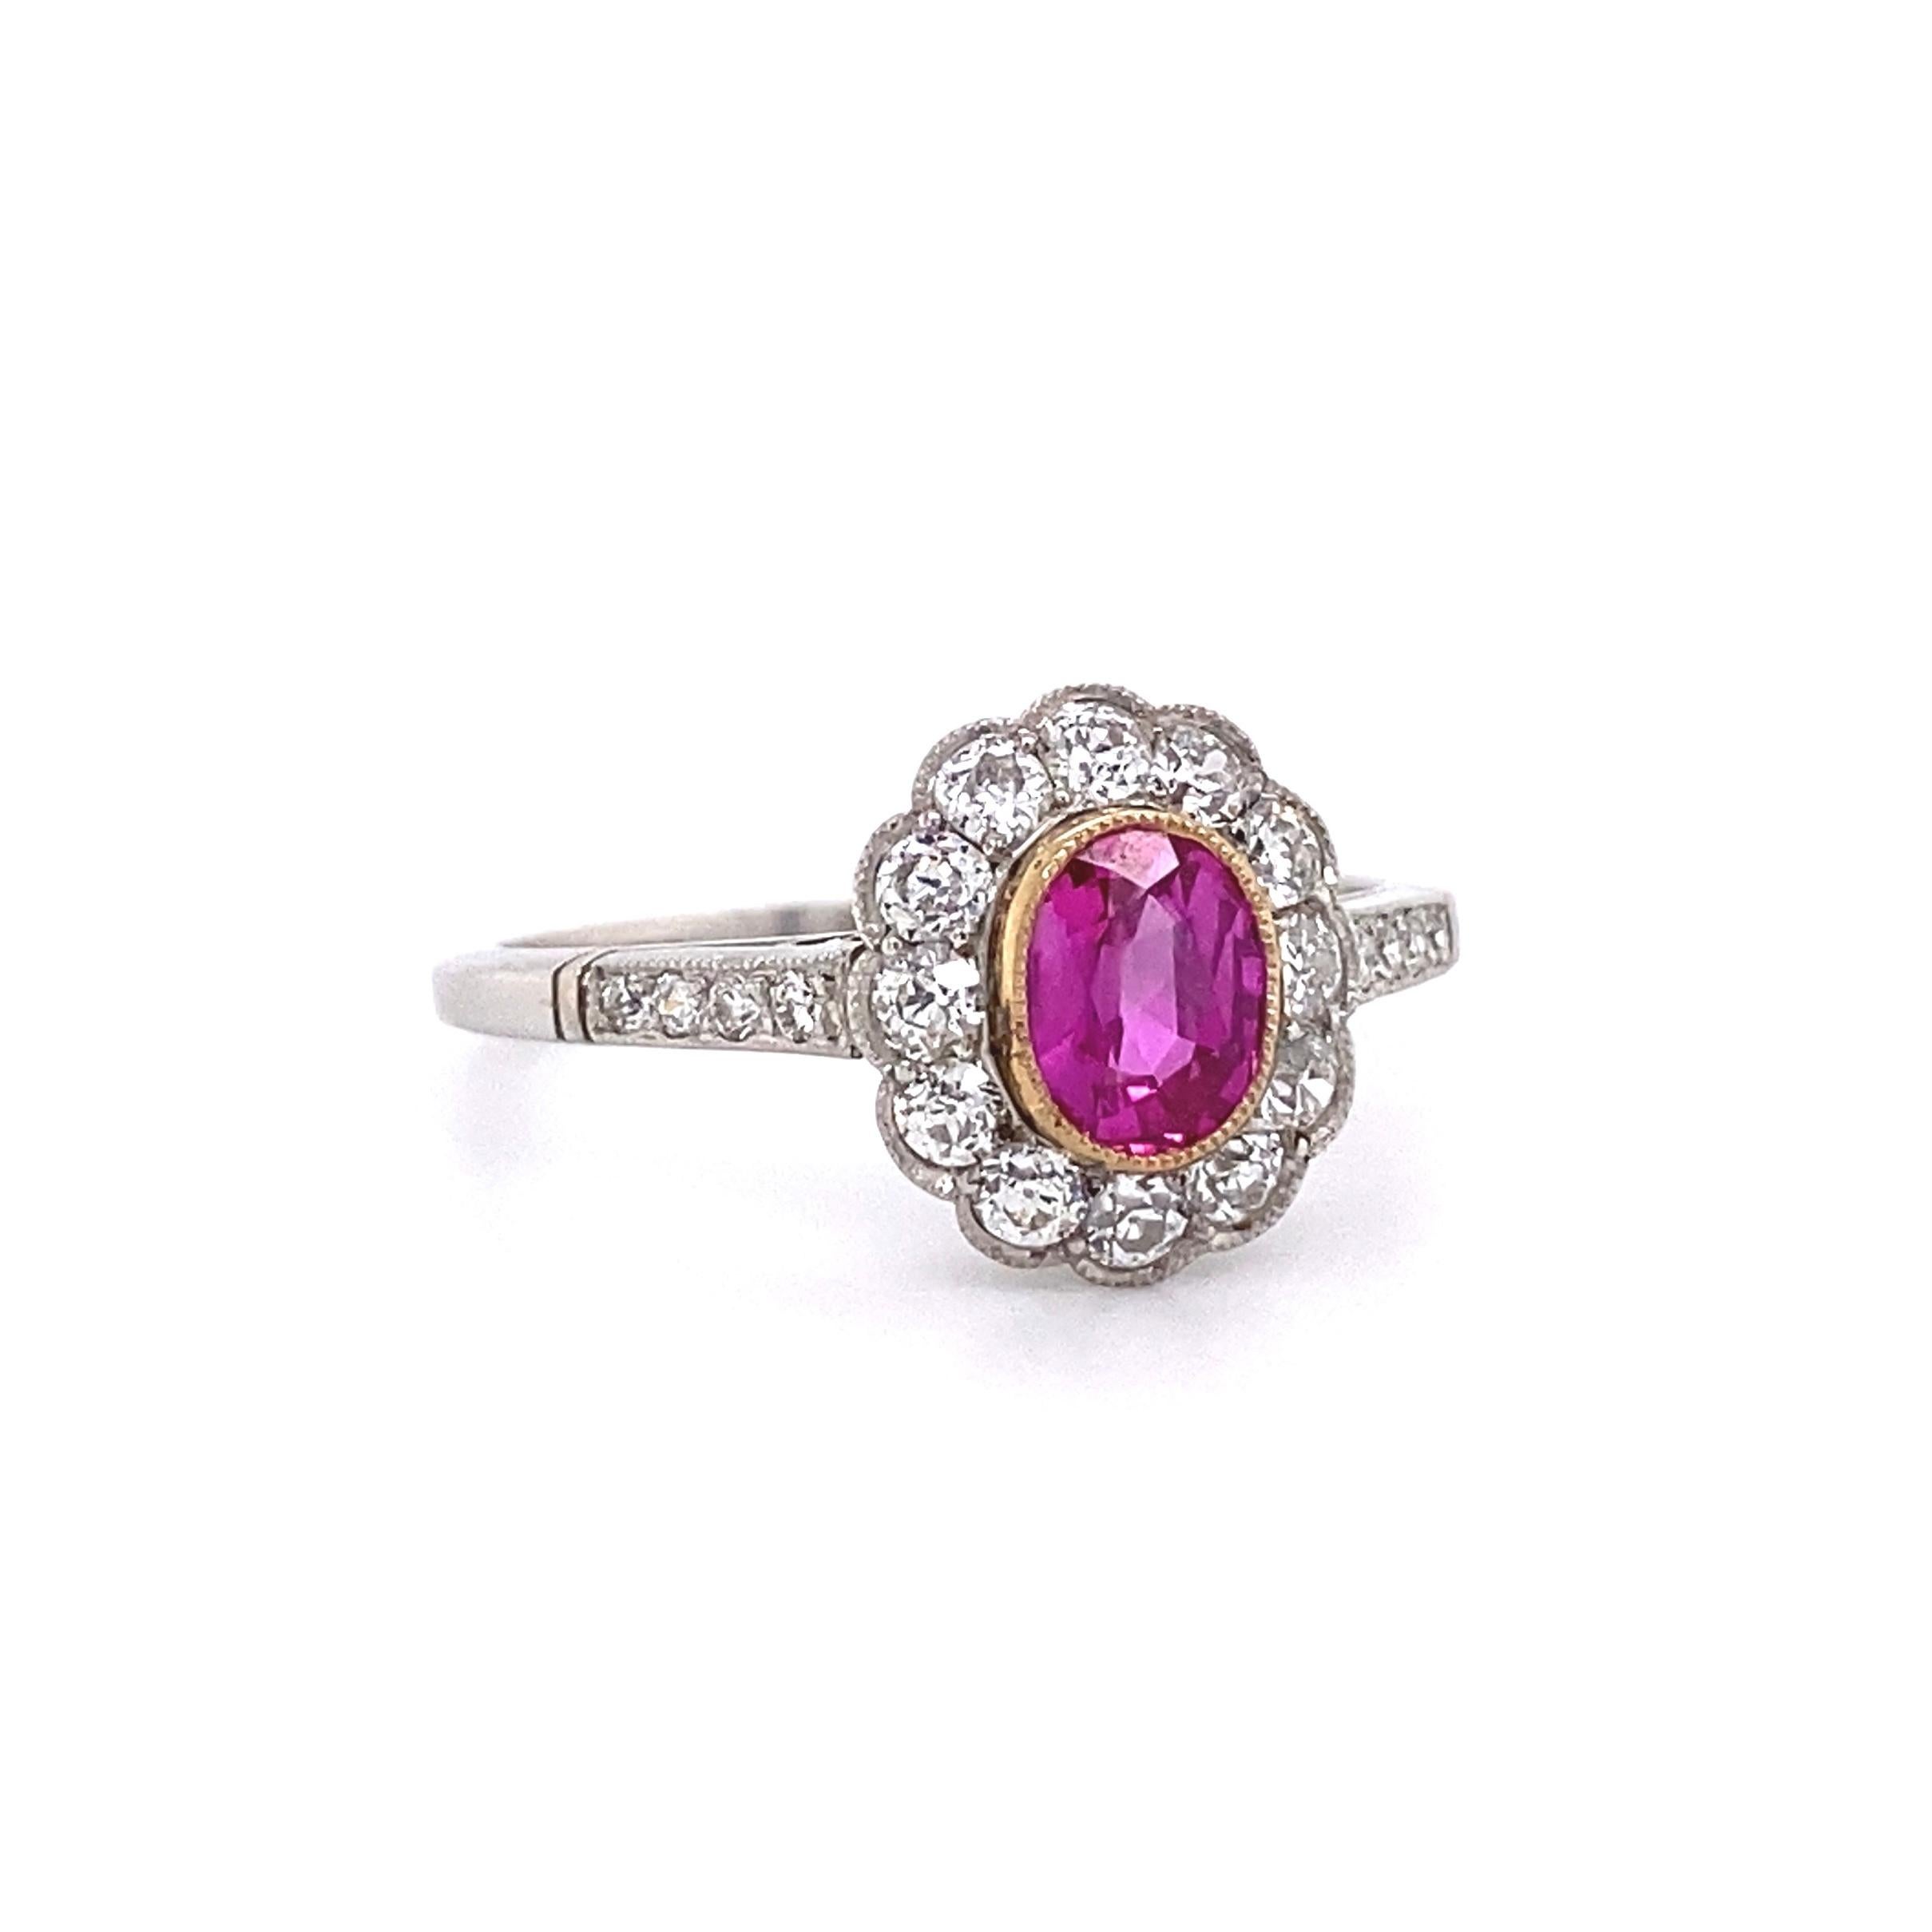 Simply Beautiful! Finely detailed Awesome Art Deco Platinum Halo Ring, center securely nestled in Gold Bezel setting with a Burma Ruby weighing approx. 0.60 Carat. GIA lab report #2201900536, stating Burma origin and NO indications of heat